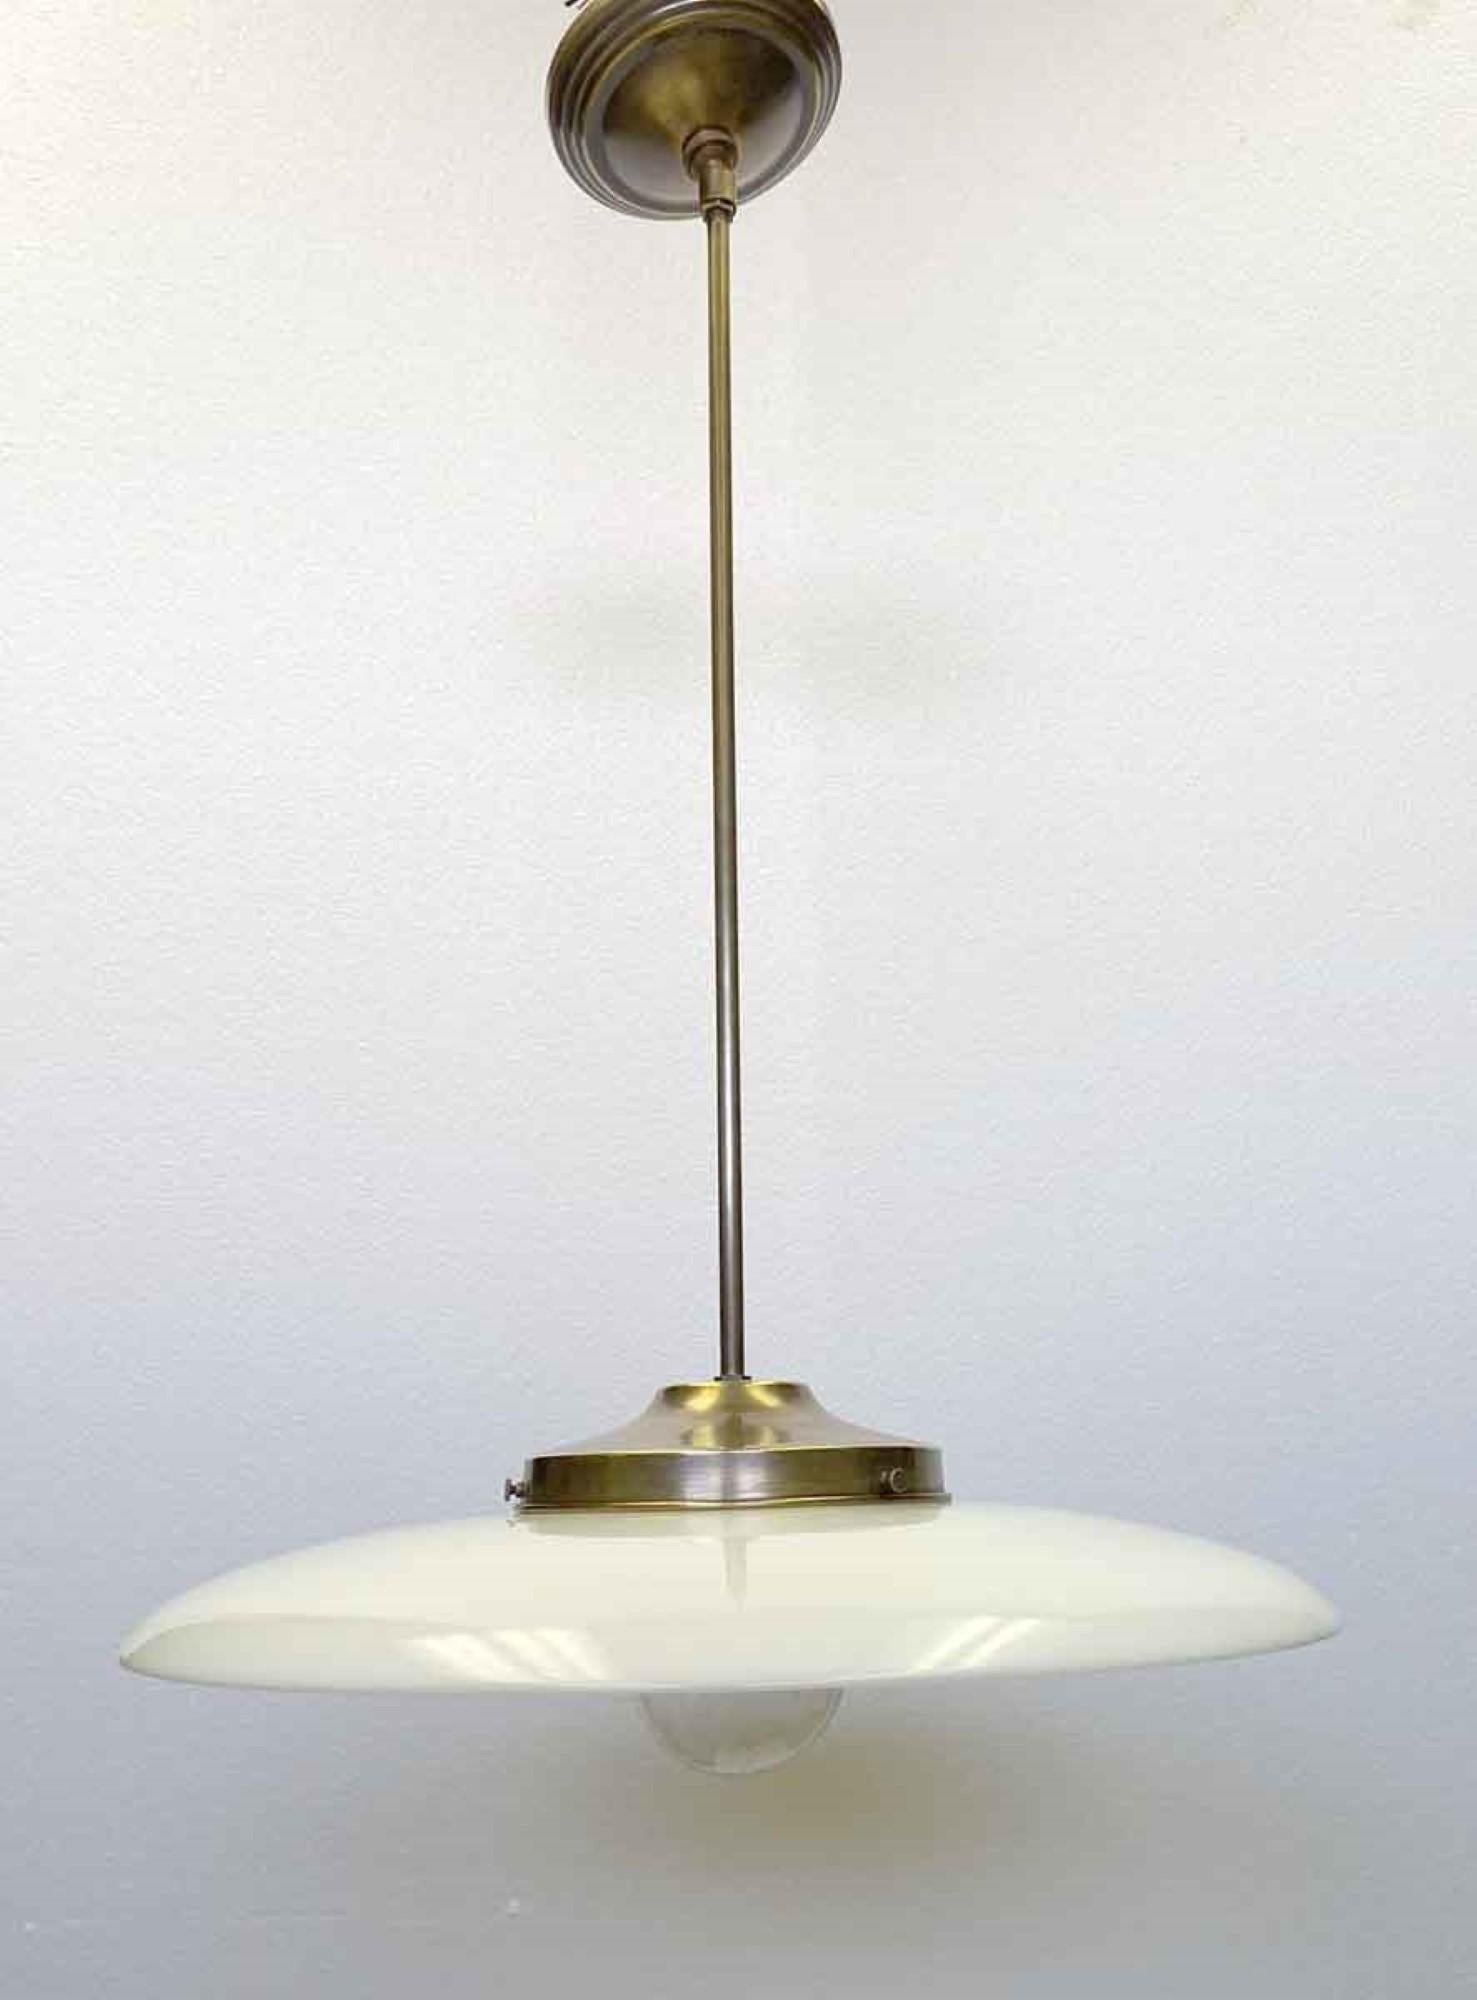 Rare 1910s industrial age curved pancake shaped white milk glass pendant light fitted with a newly wired brass pole fixture. Measures: 17 in. We also can do polished nickel if you prefer. This pairs well with an Edison bulb. Small quantity available